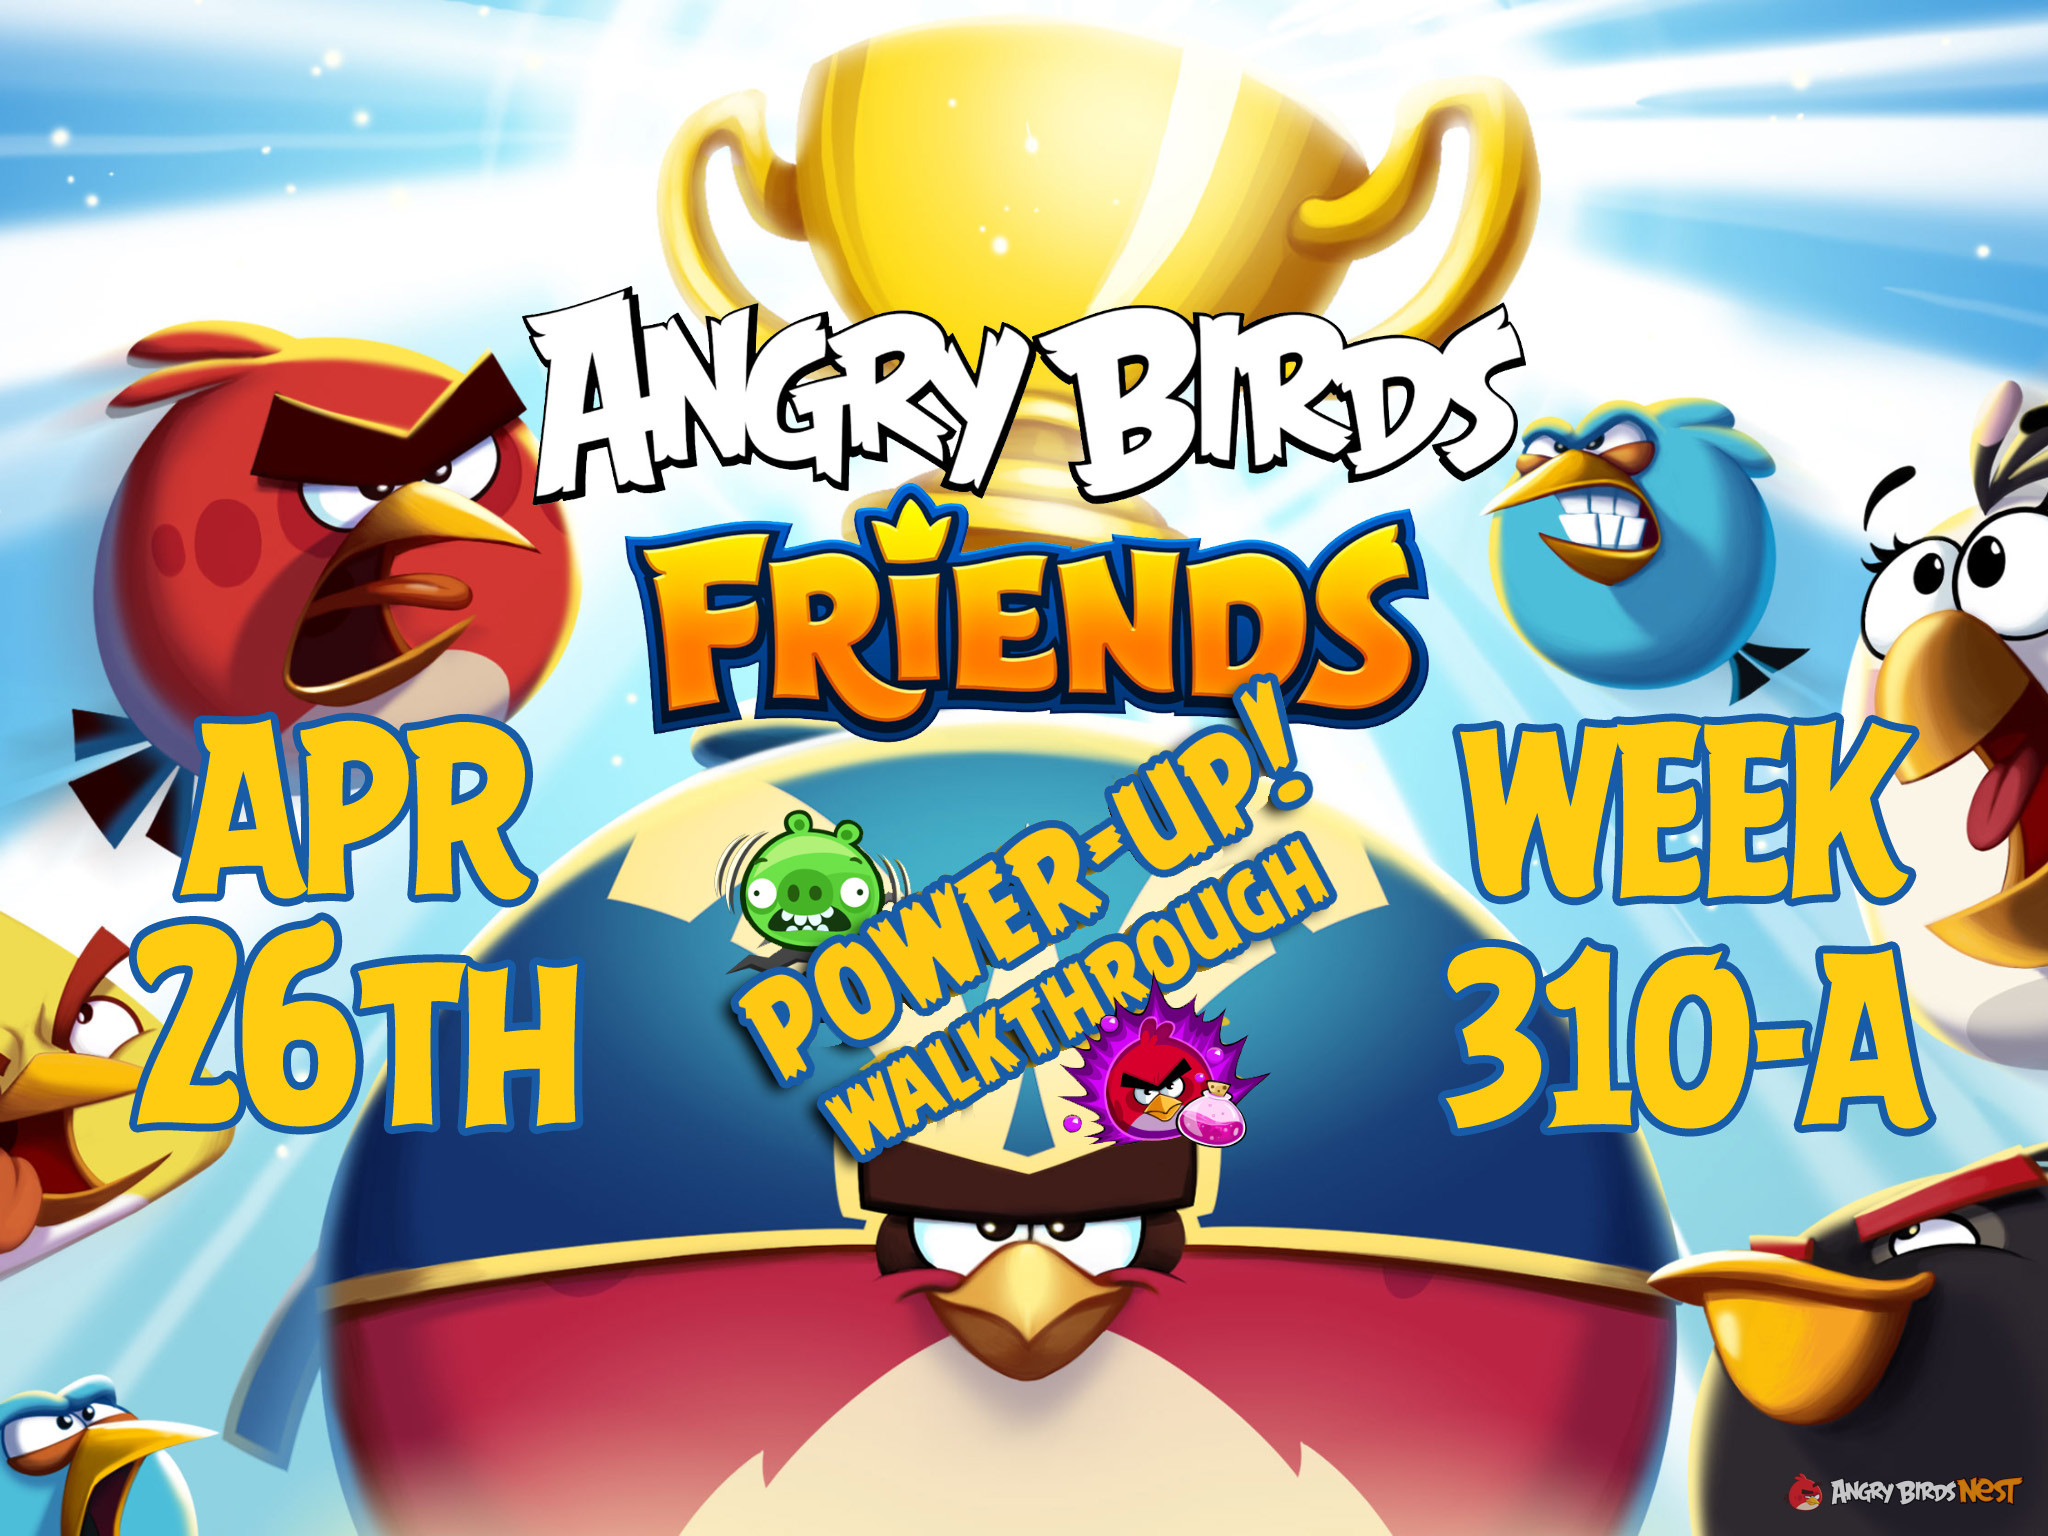 Angry Birds Friends Tournament Week 310-A Feature Image PU